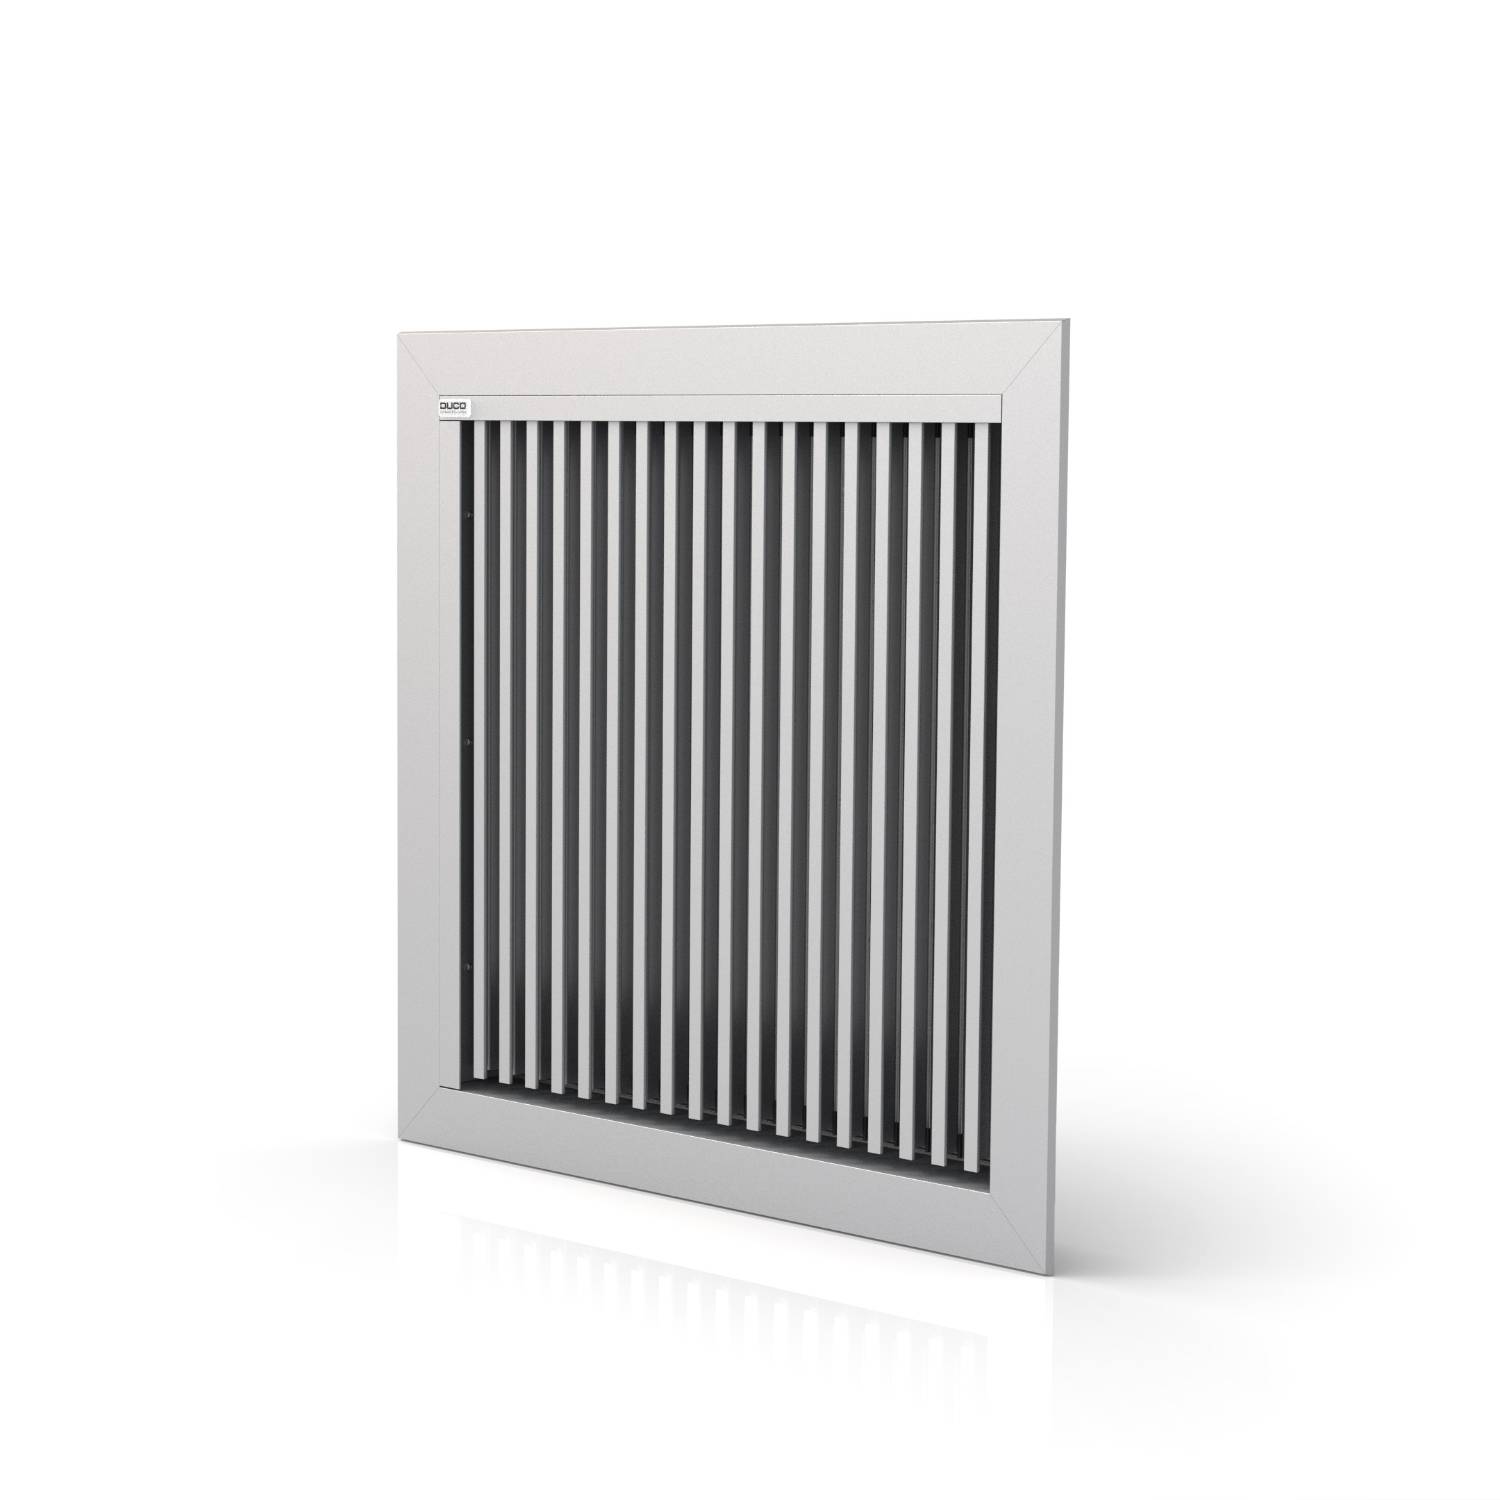 DucoGrille Classic G 60HP - Aluminium Build-In Wall Louvre